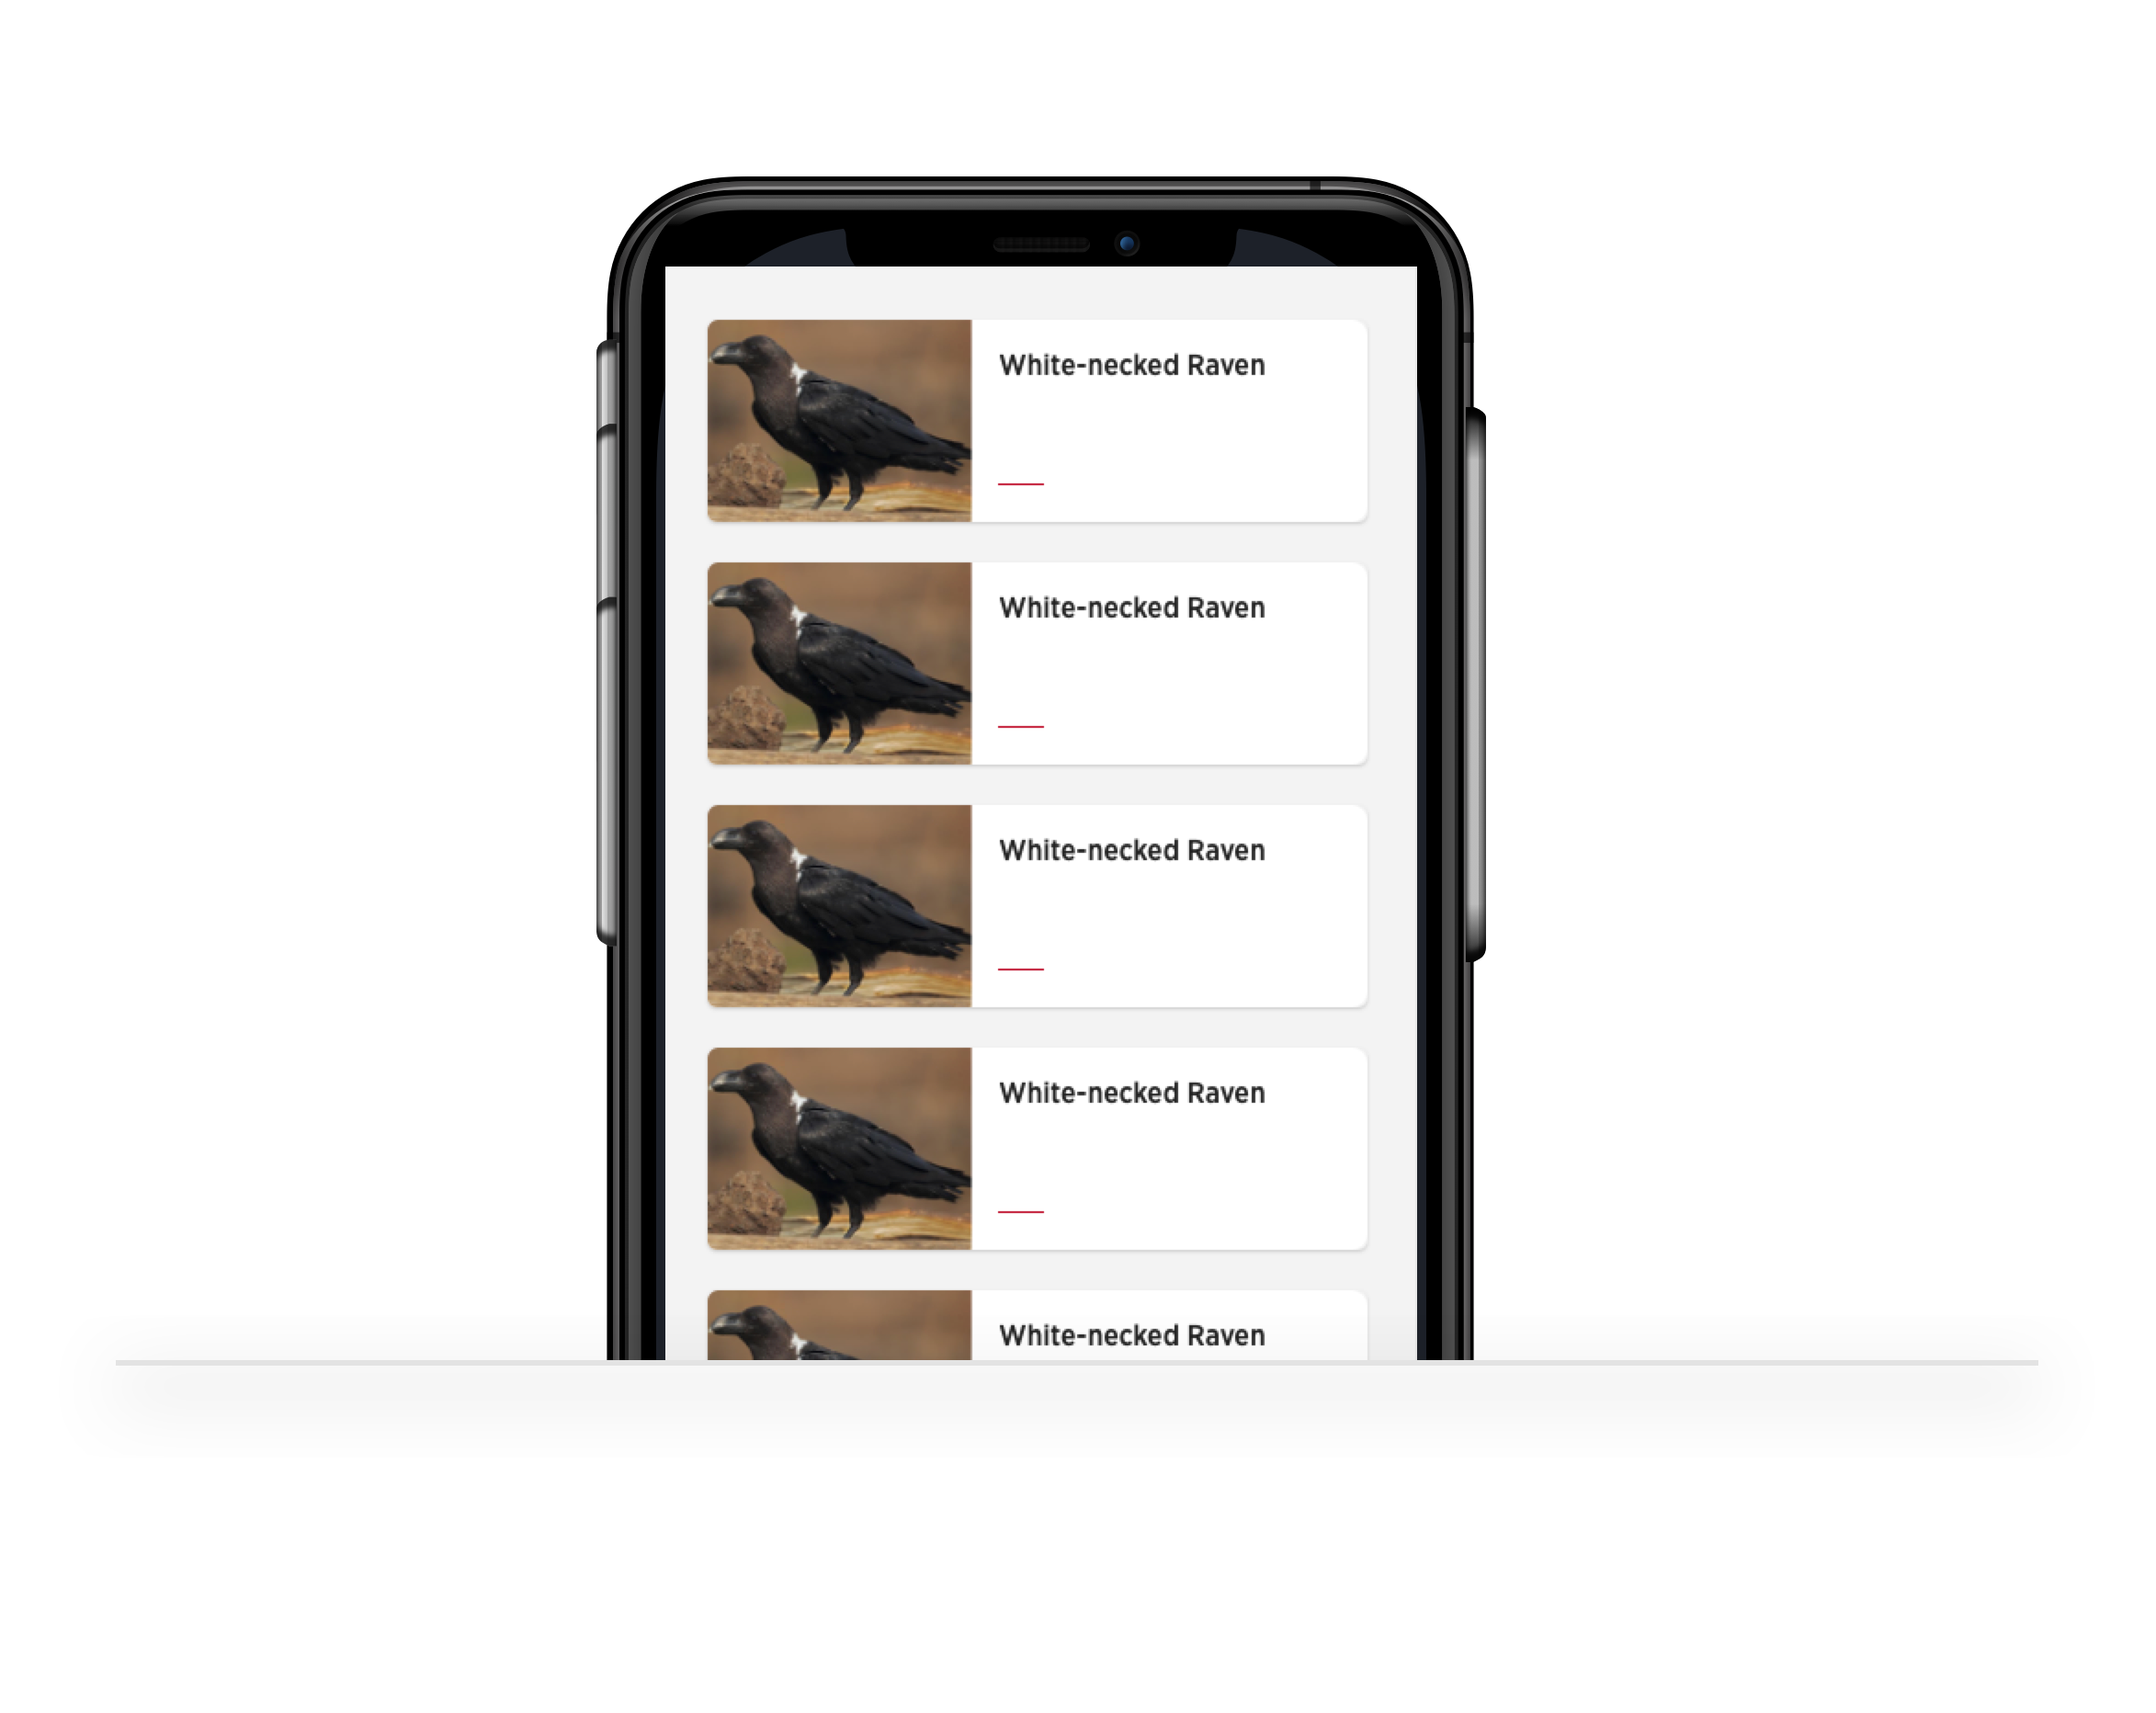 Showing the Card Grid on mobile